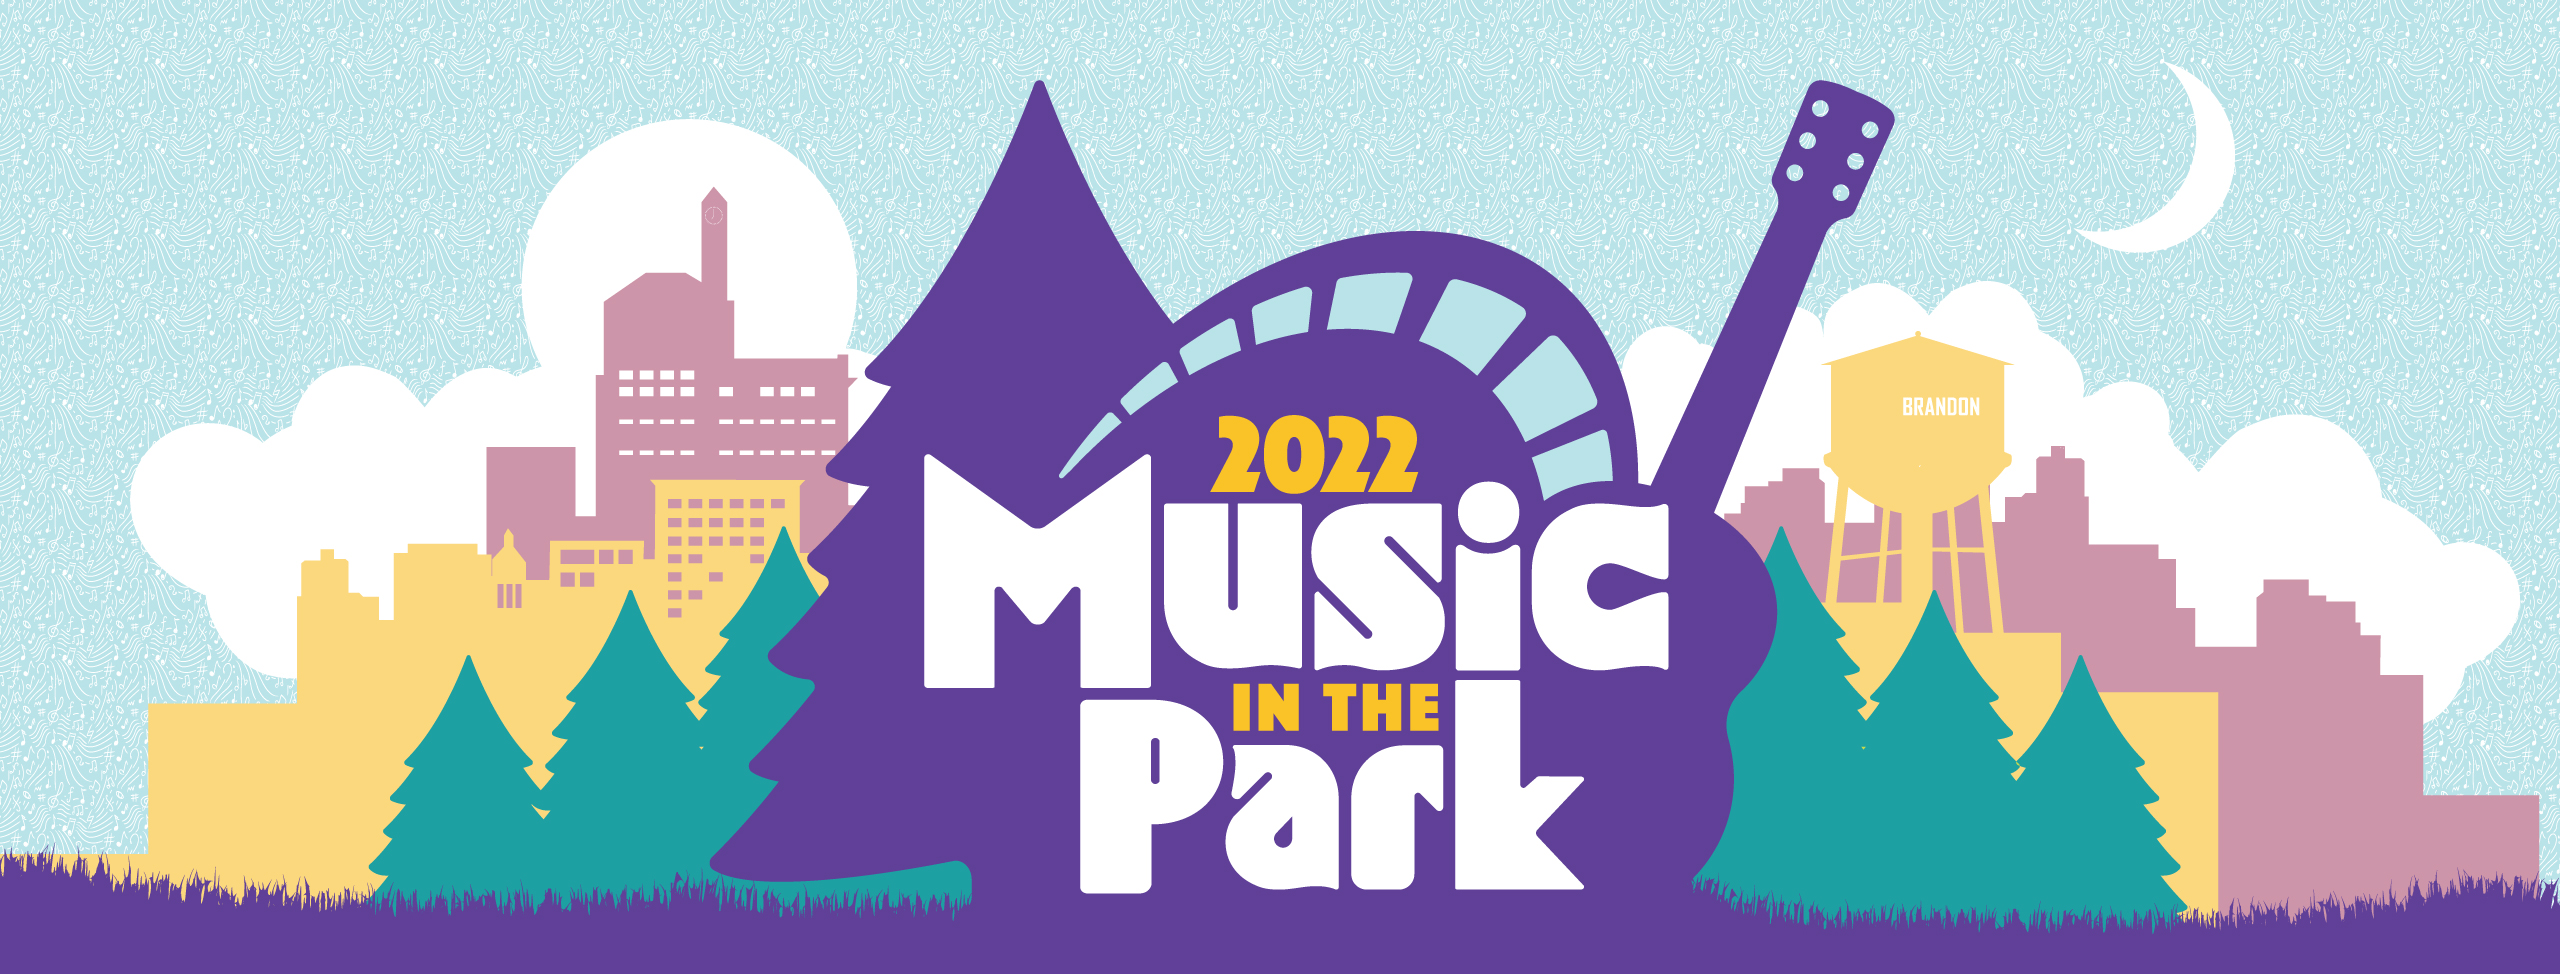 Music in the Parks 2022 